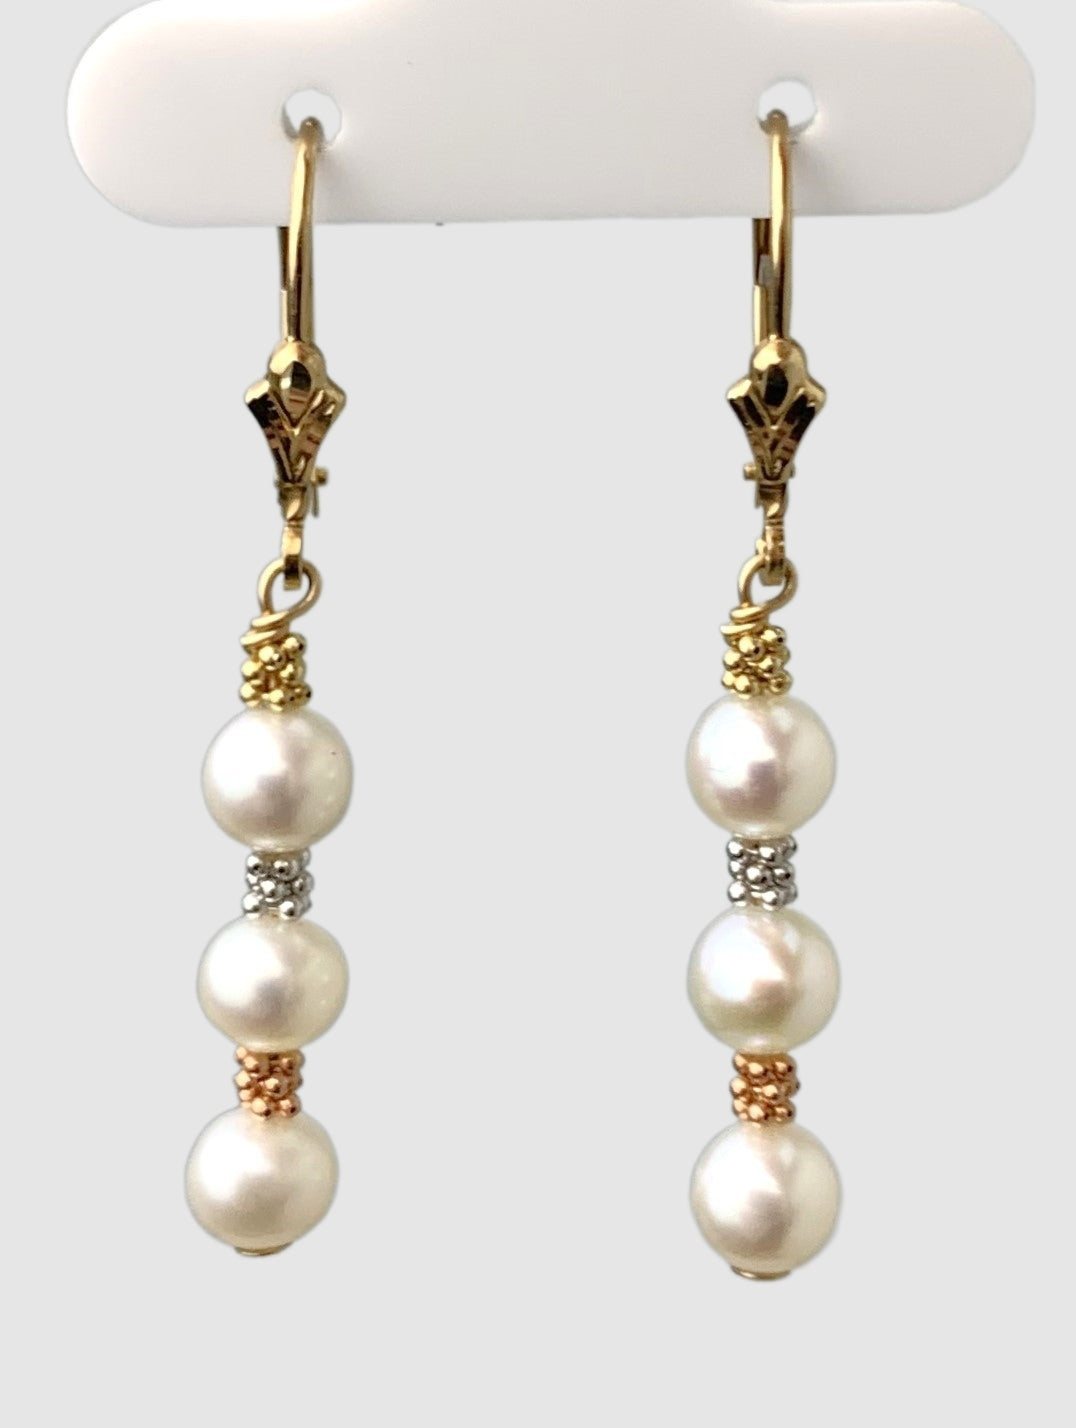 Clearance Sale! - Pearl and Rondelle Drop Earrings in 14KY - EAR-015-WIREPRL14Y-WH